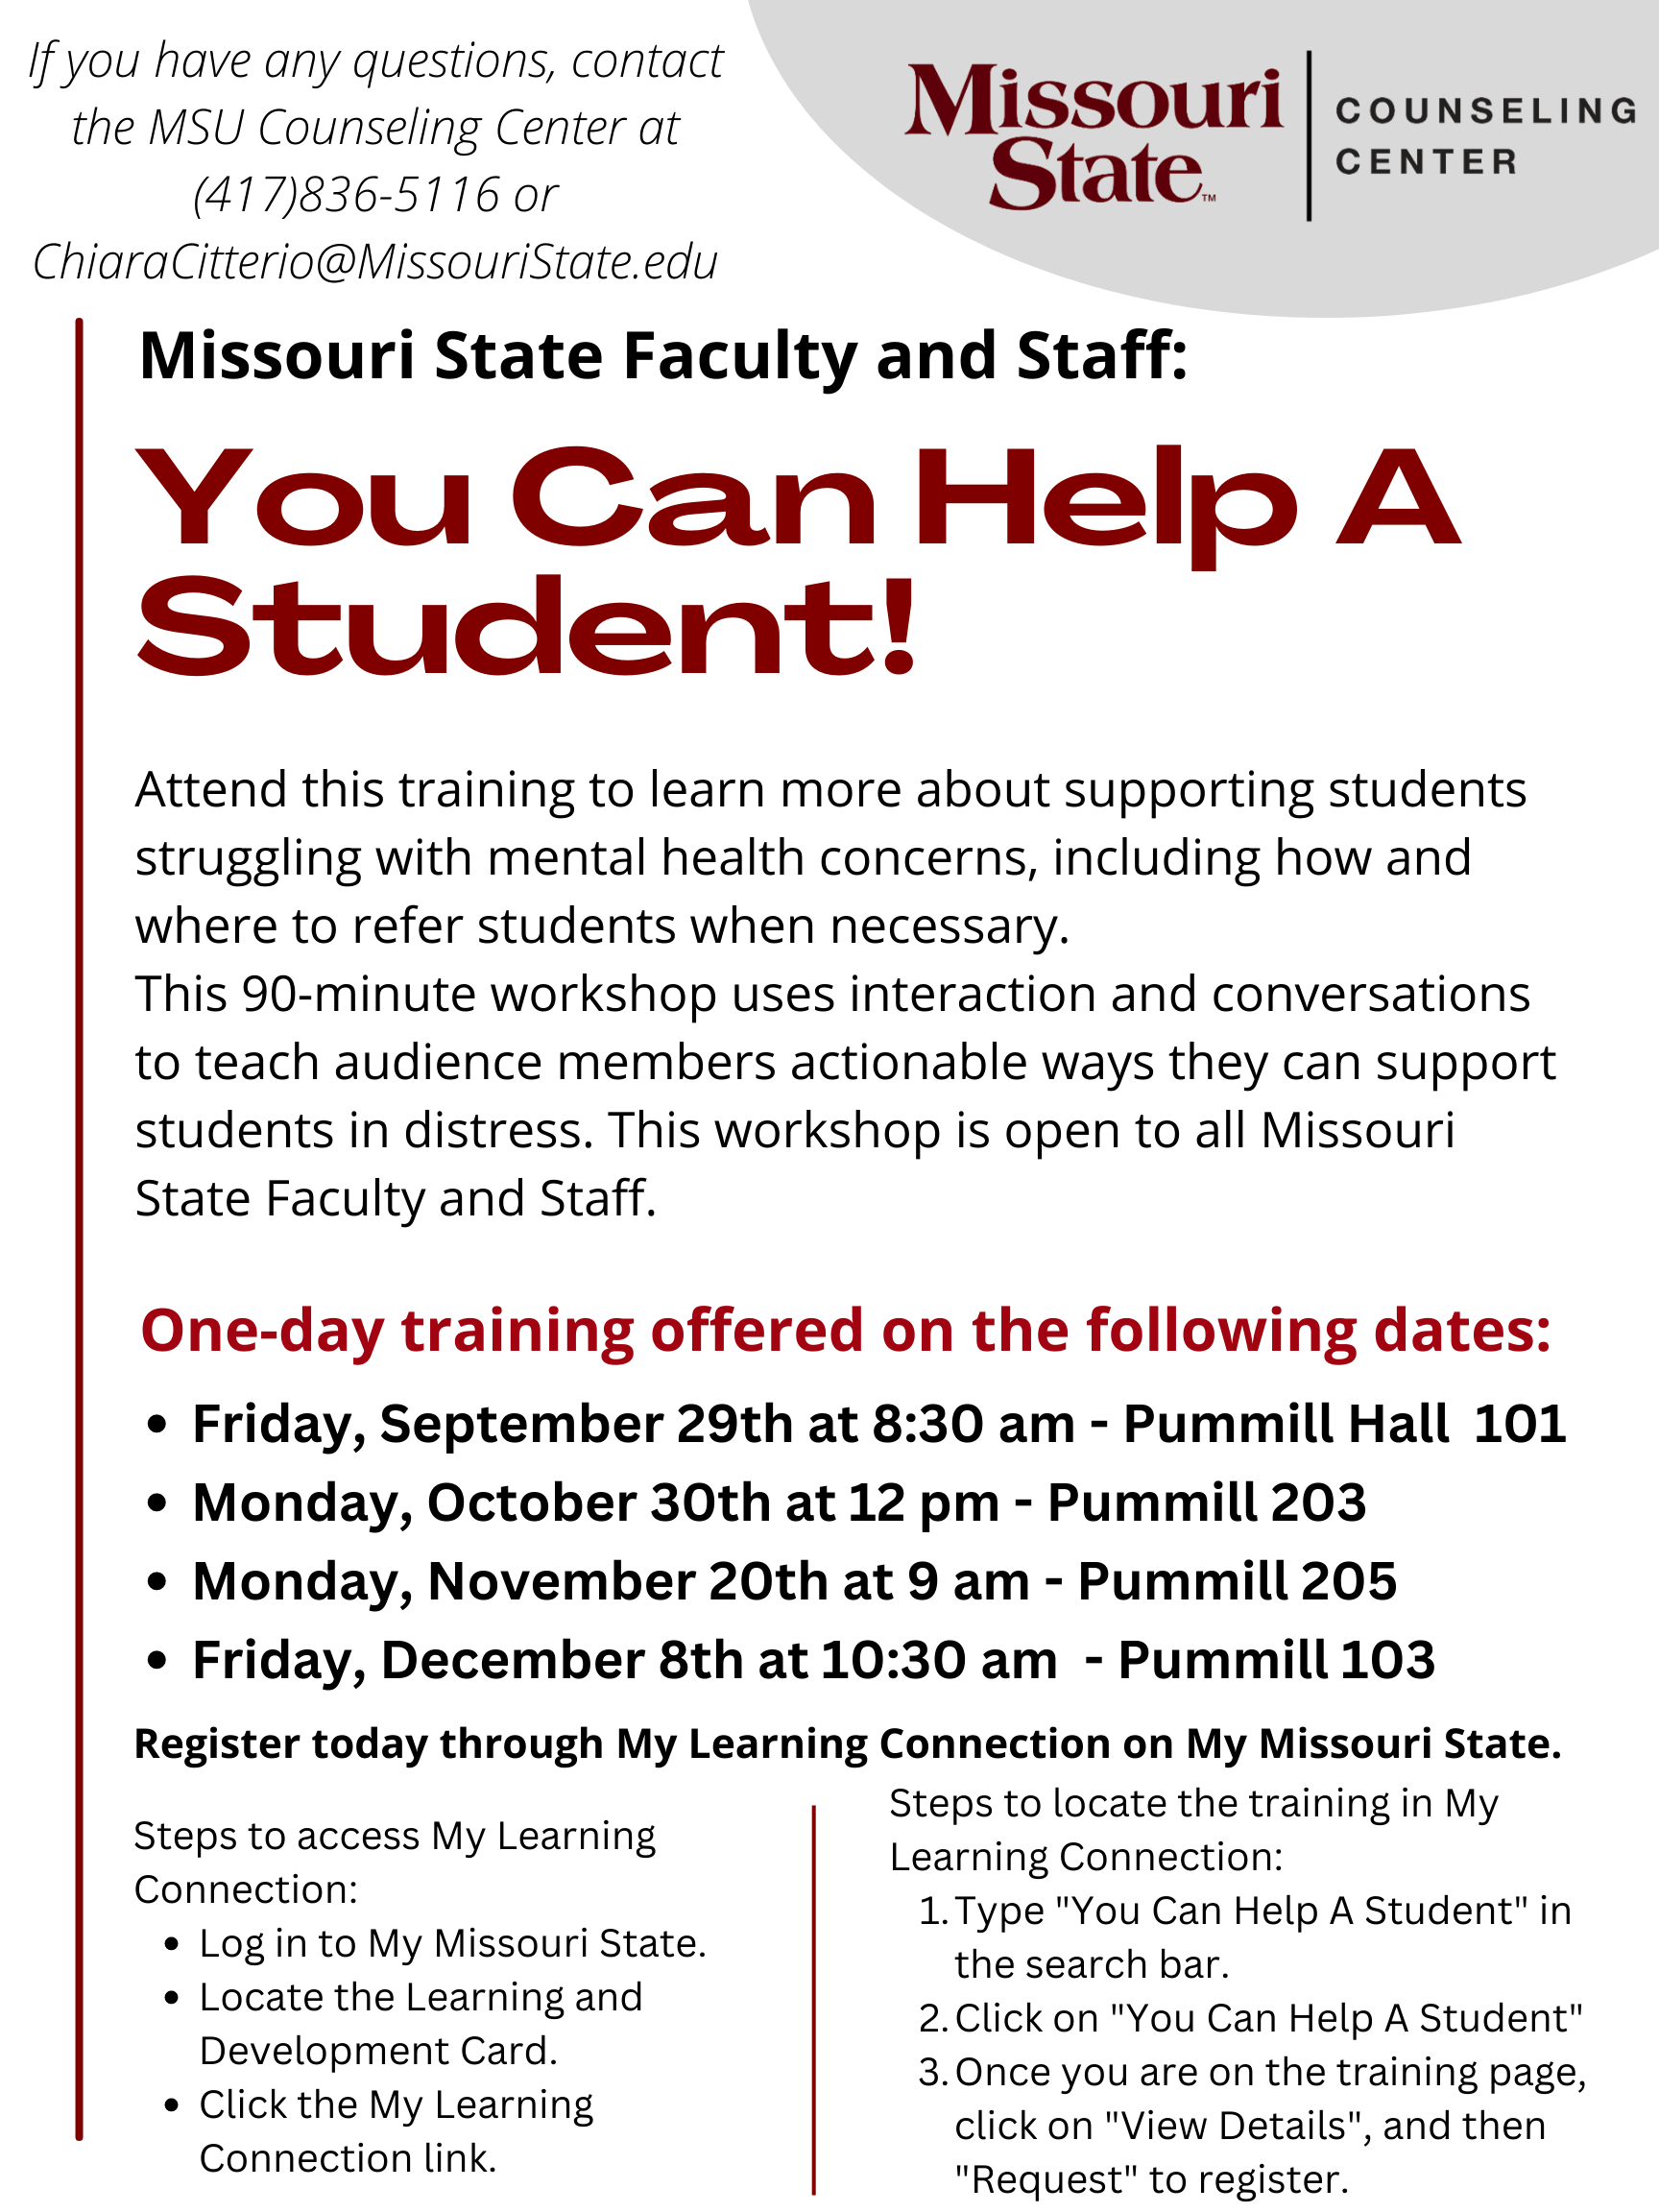 You Can Help A Student training flyer